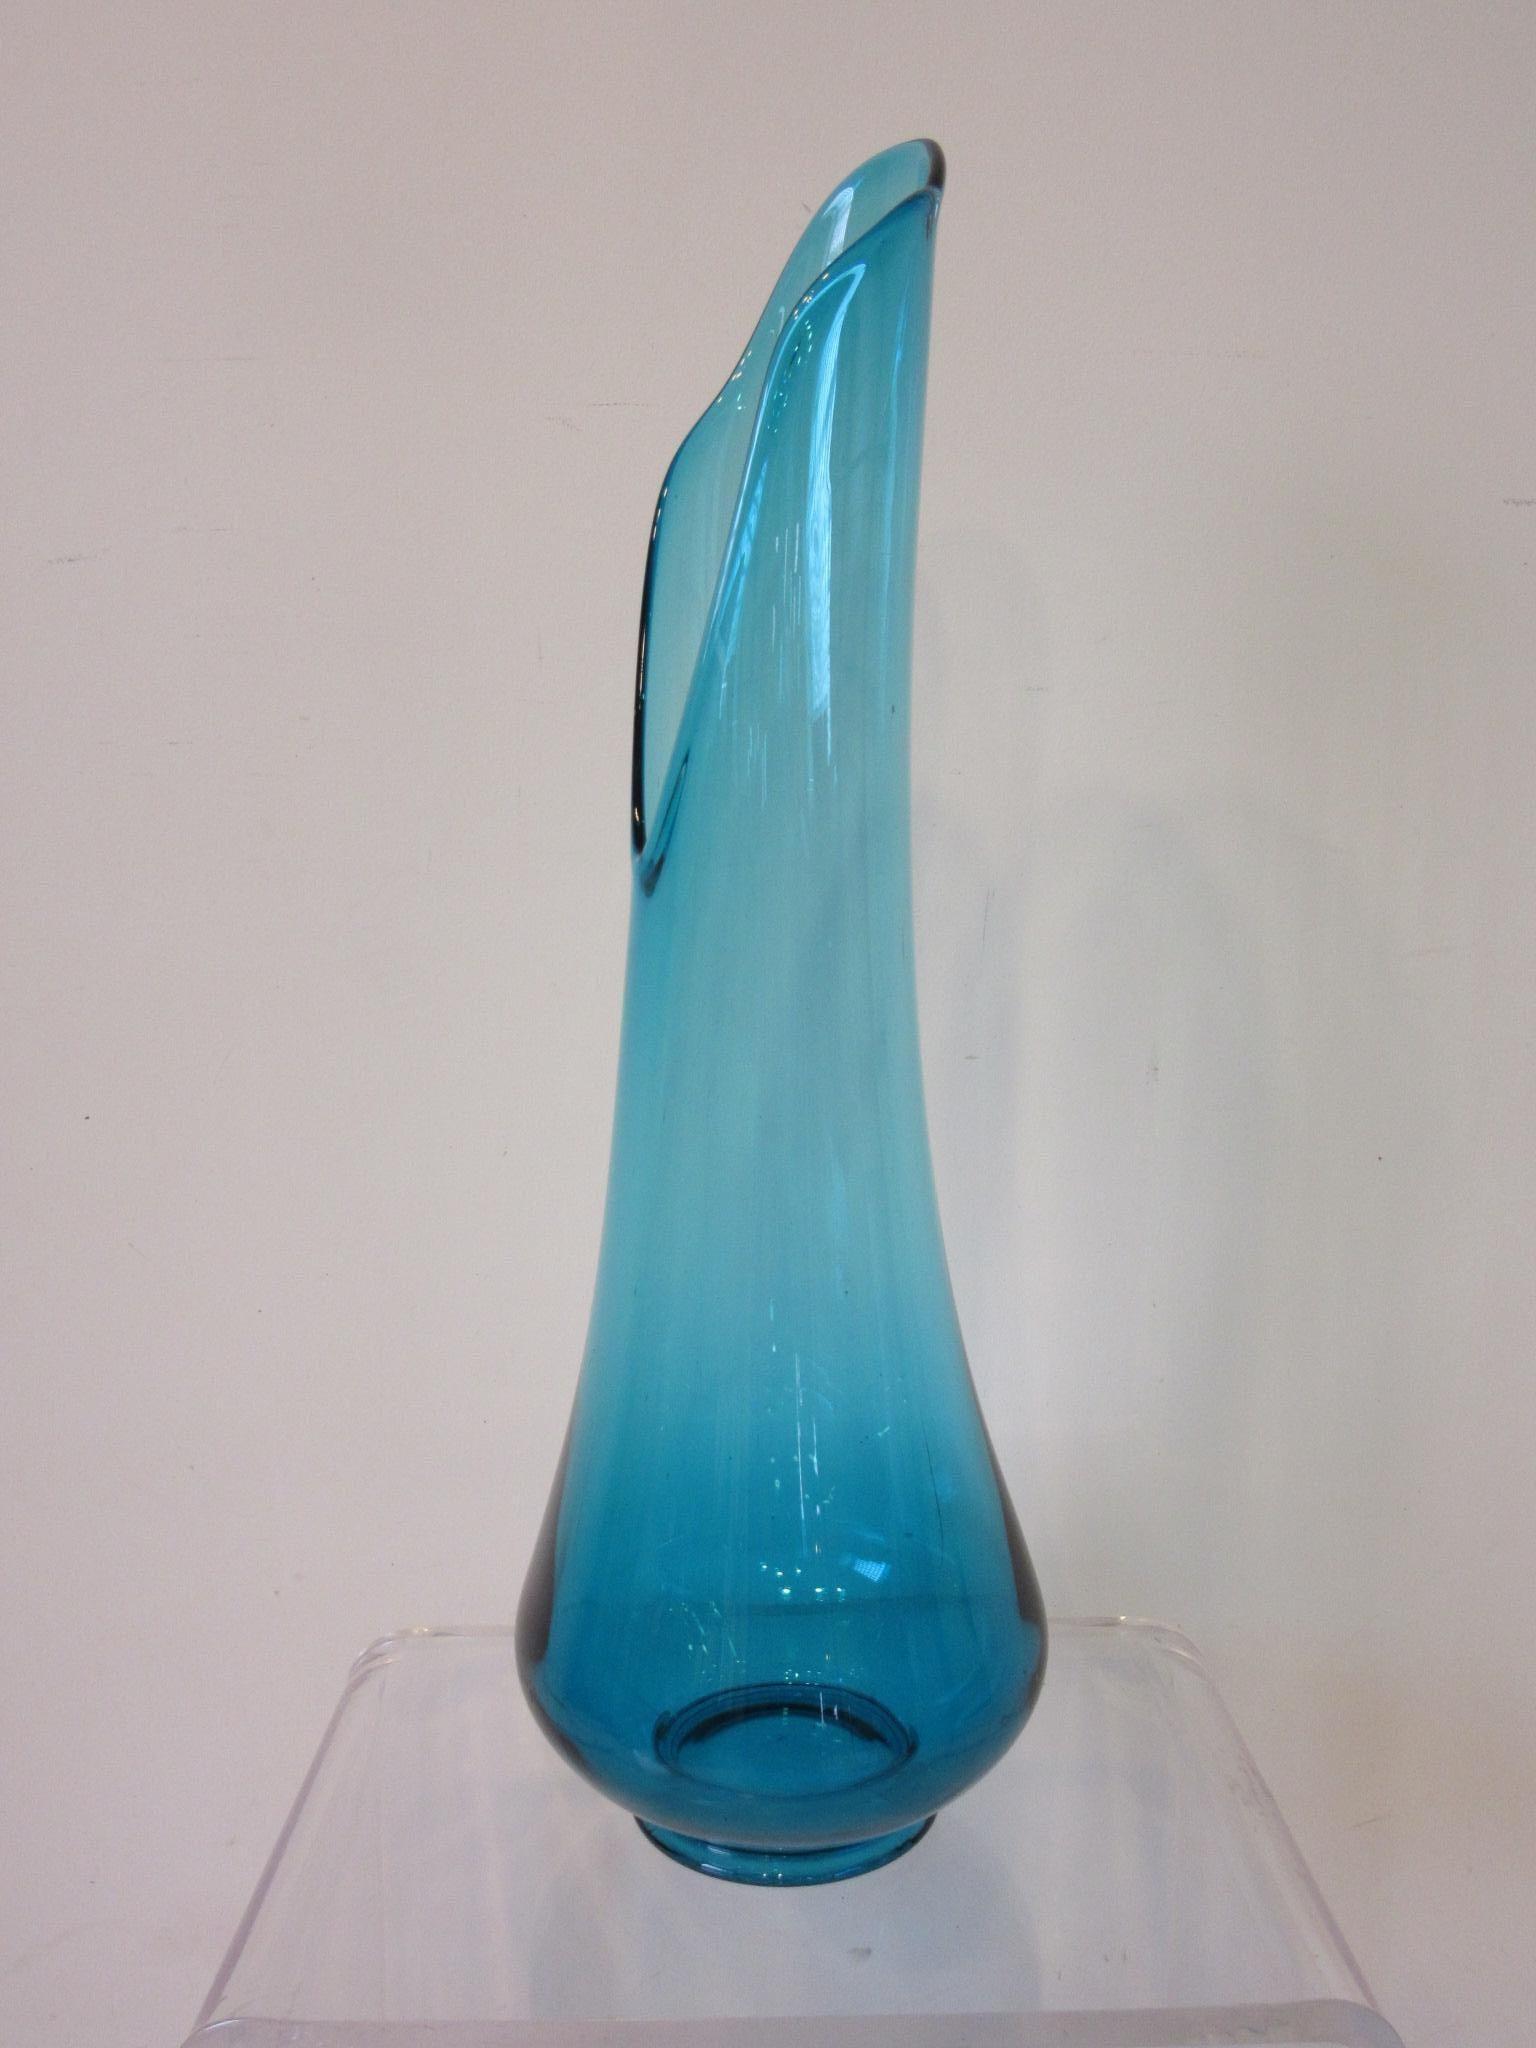 A very large hand blown aqua blue glass vase with sculptural wide mouth opening and curving sides forming into the bulbous base. A great piece of midcentury era large glass shapes in peacock blue for LE Smith from their Simplicity Line .